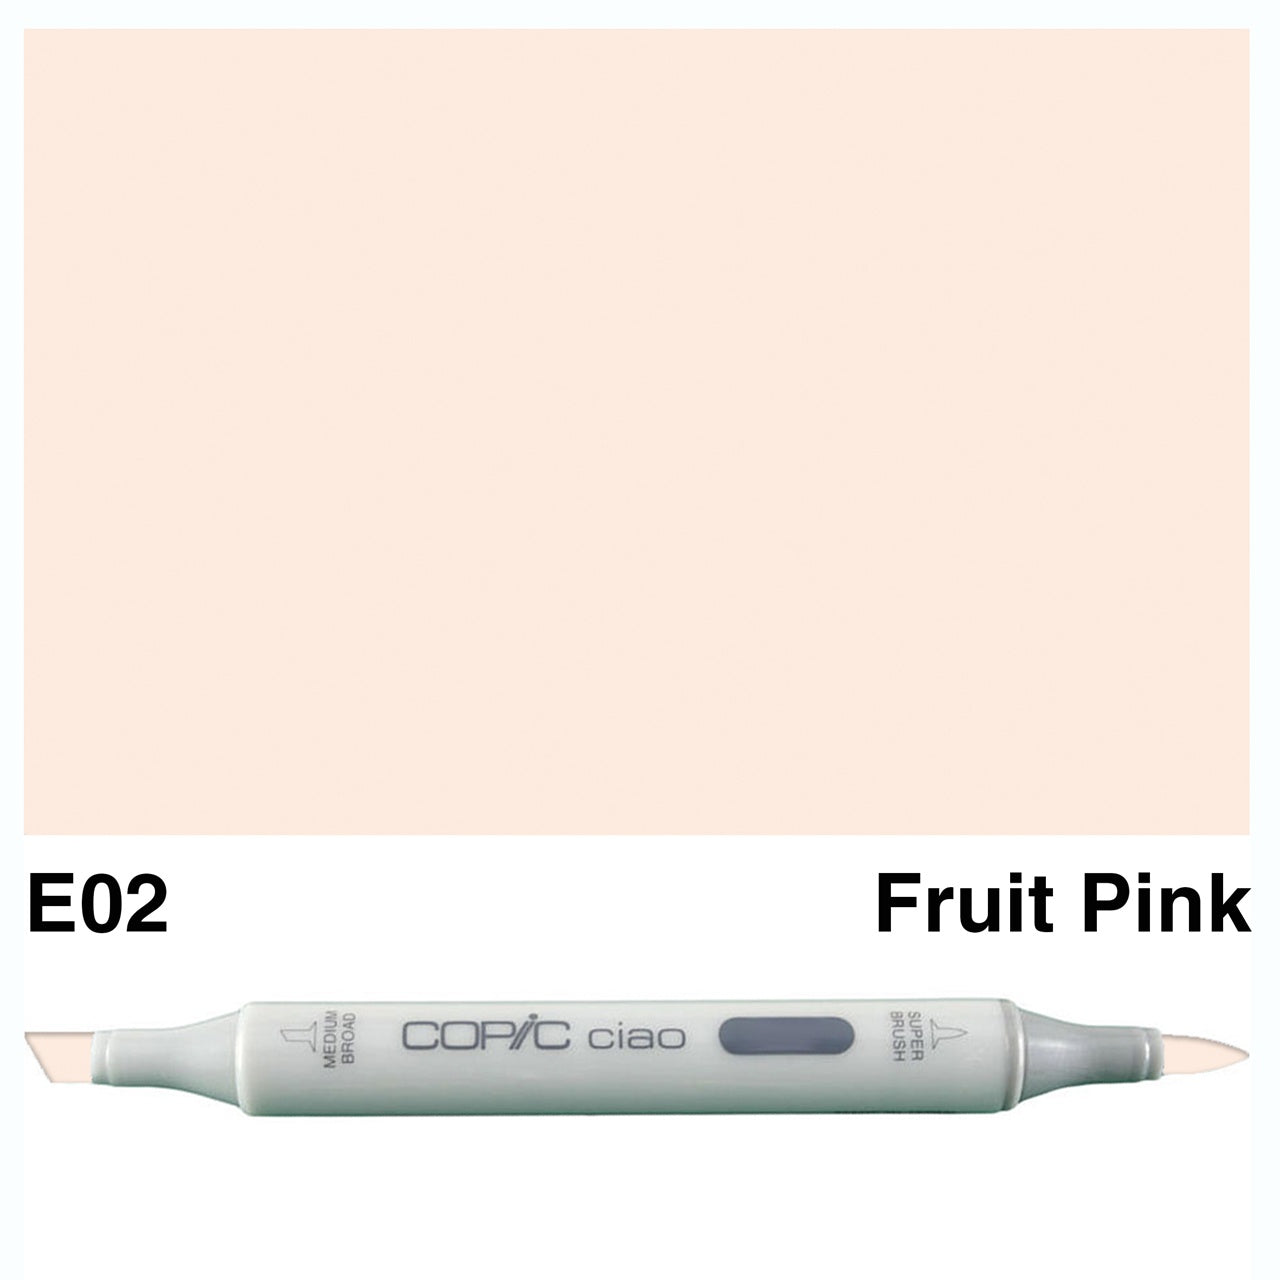 Copic Ciao Marker E02 - Fruit Pink